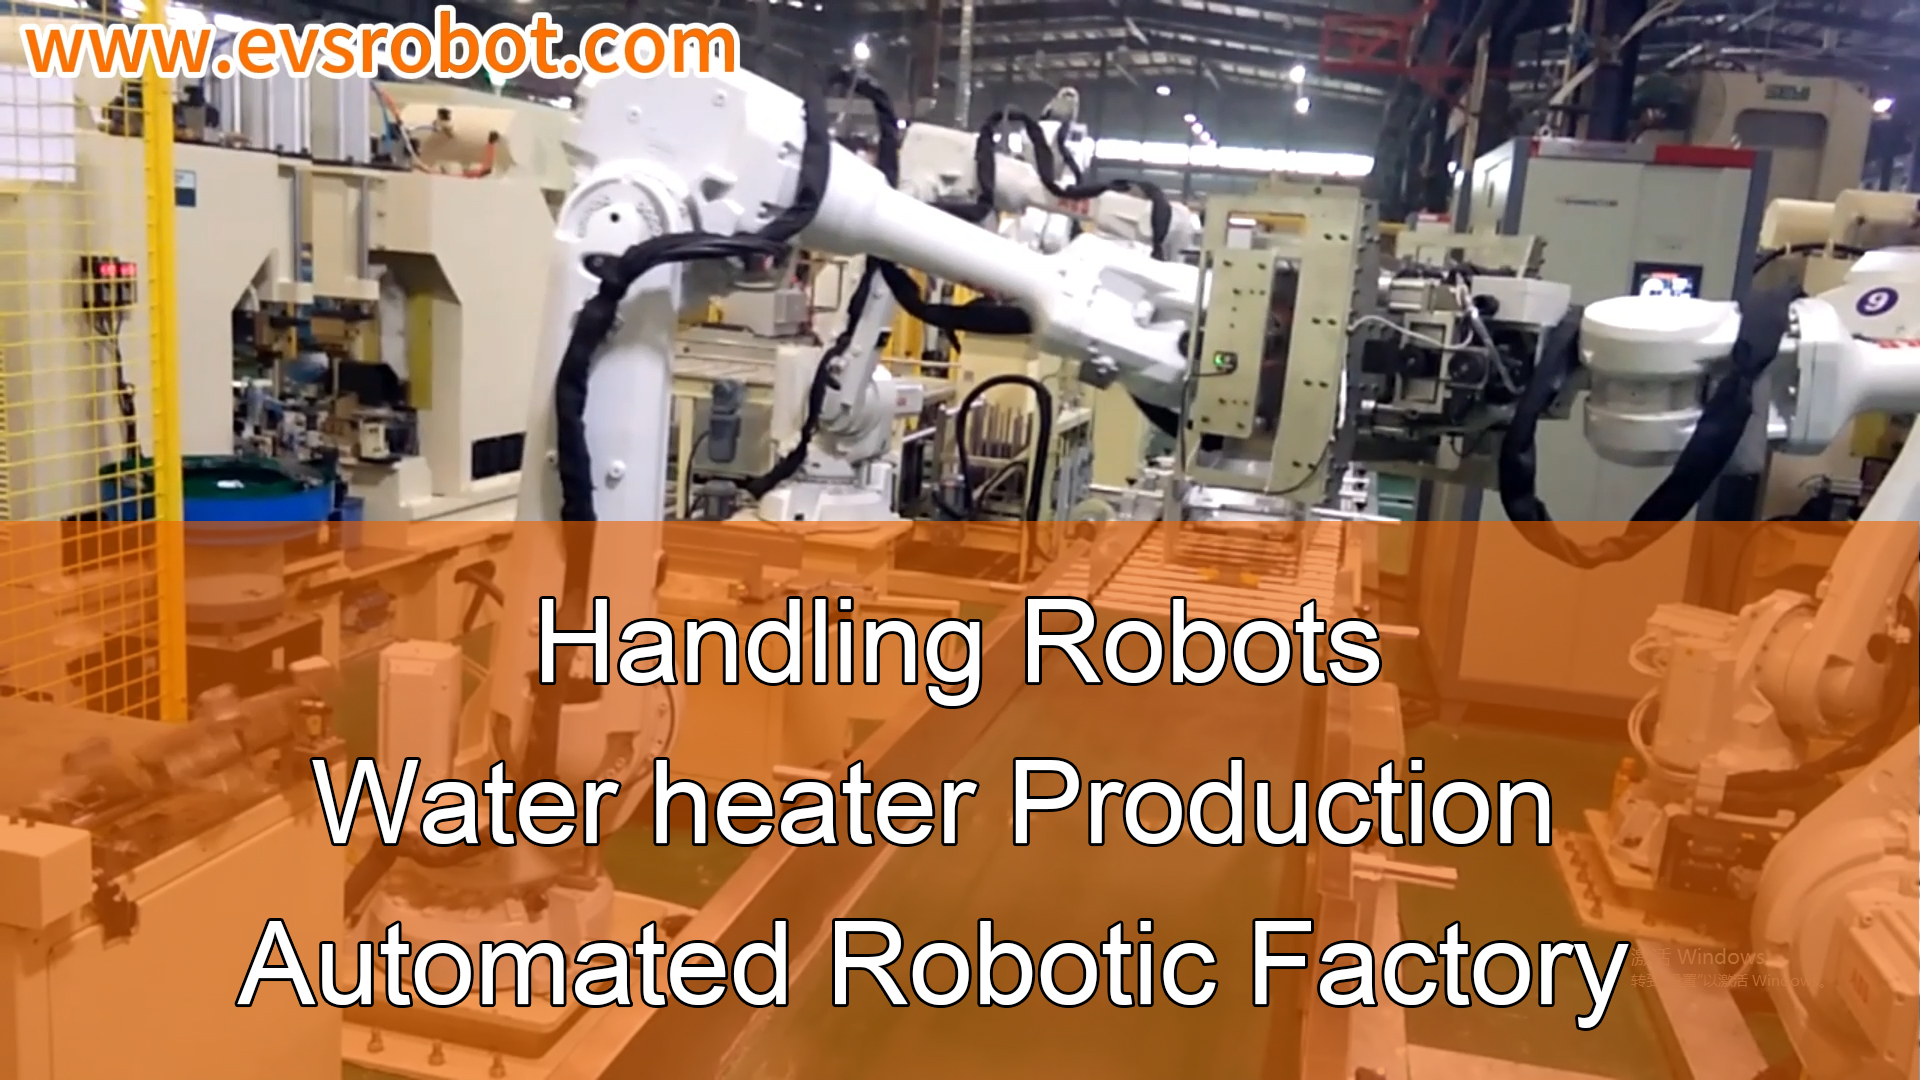 Handling Robots | Water heater Production | Automated Robotic Factory